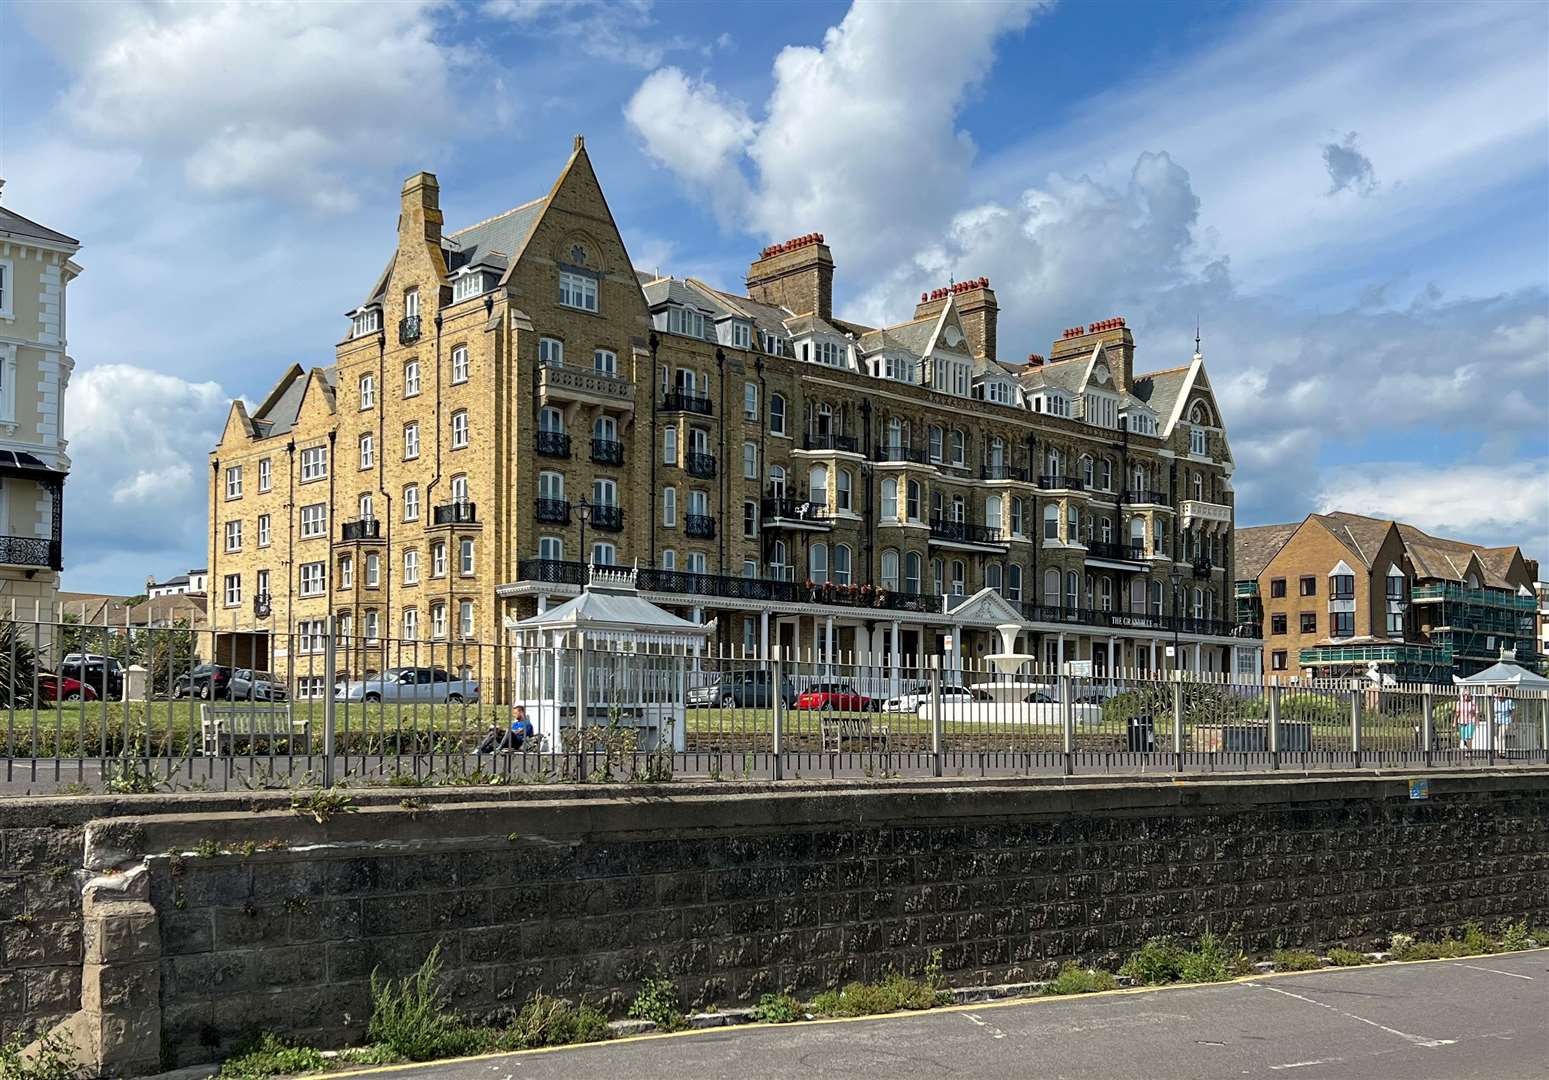 The former Granville Hotel - in its day one of the top hotels in the country